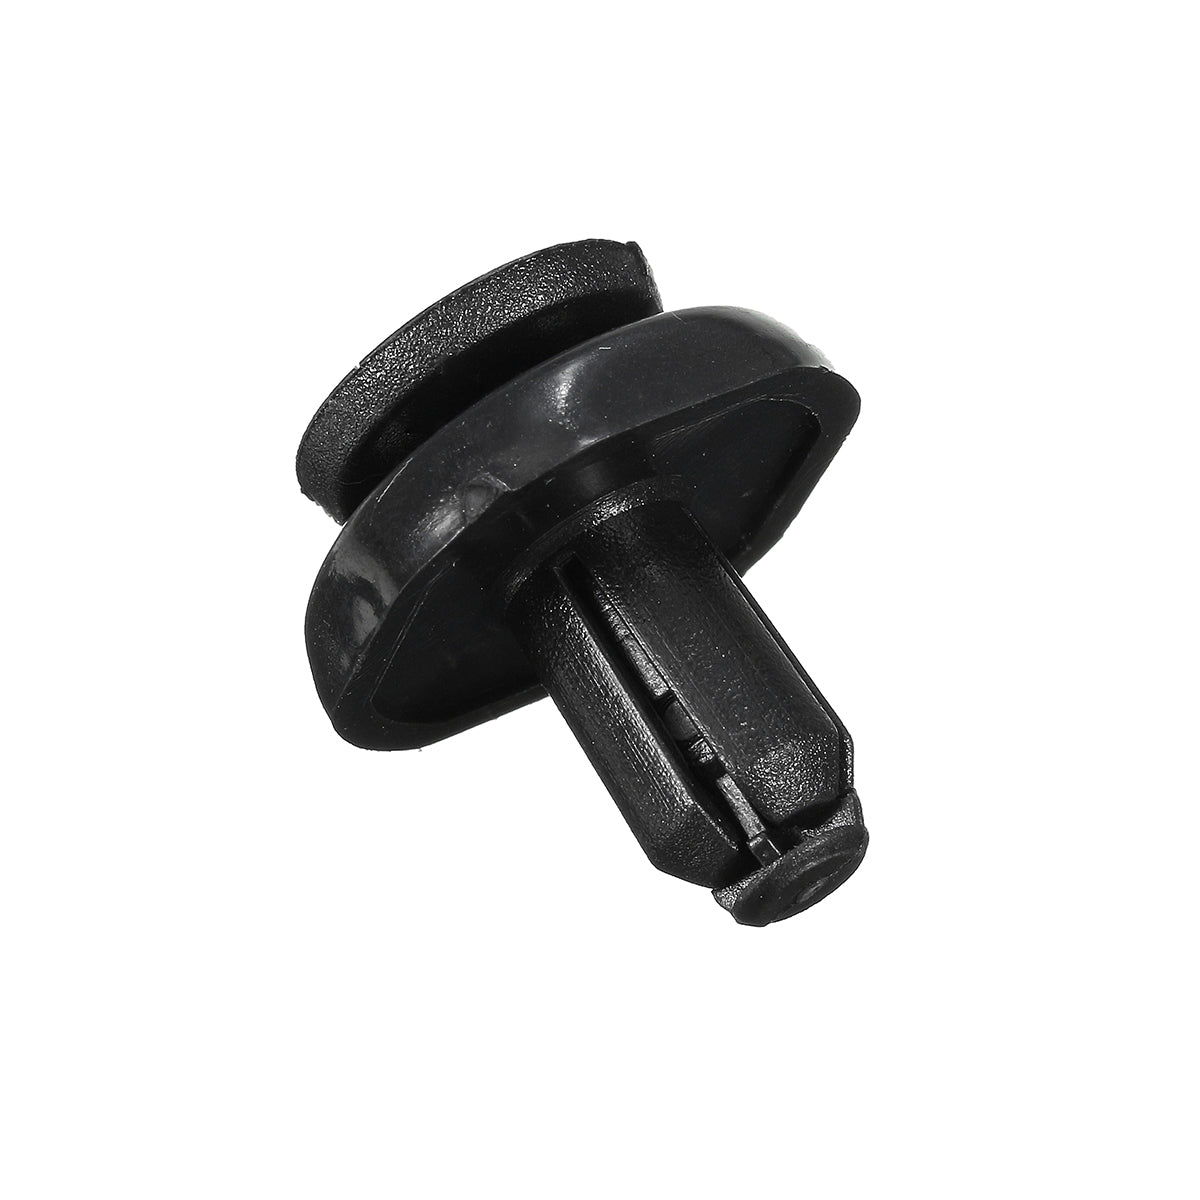 Black 7mm Radiator Cover Clips Engine Cover Trim Clips For Toyota Avensis